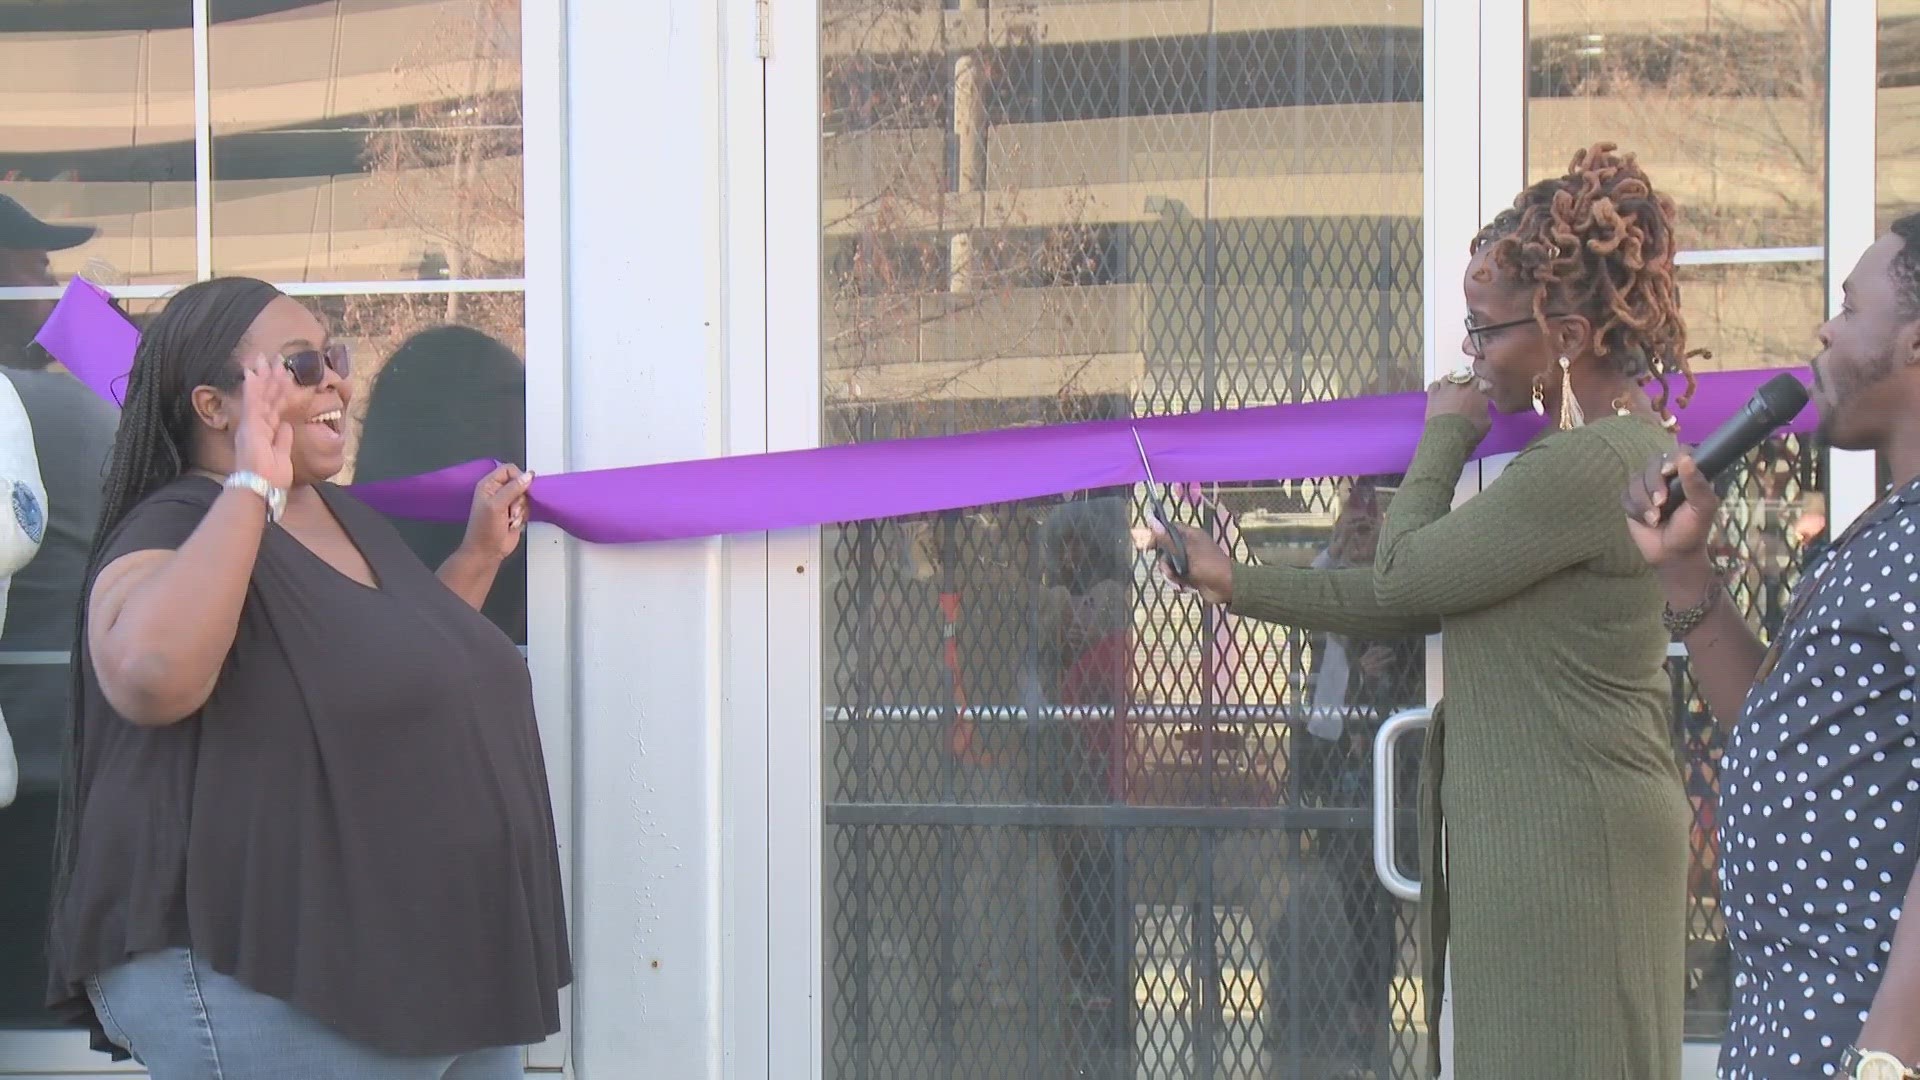 Two homeless outreach and community groups opened new headquarters in the I-65 corridor near Broadway. They say it is the area of most need.